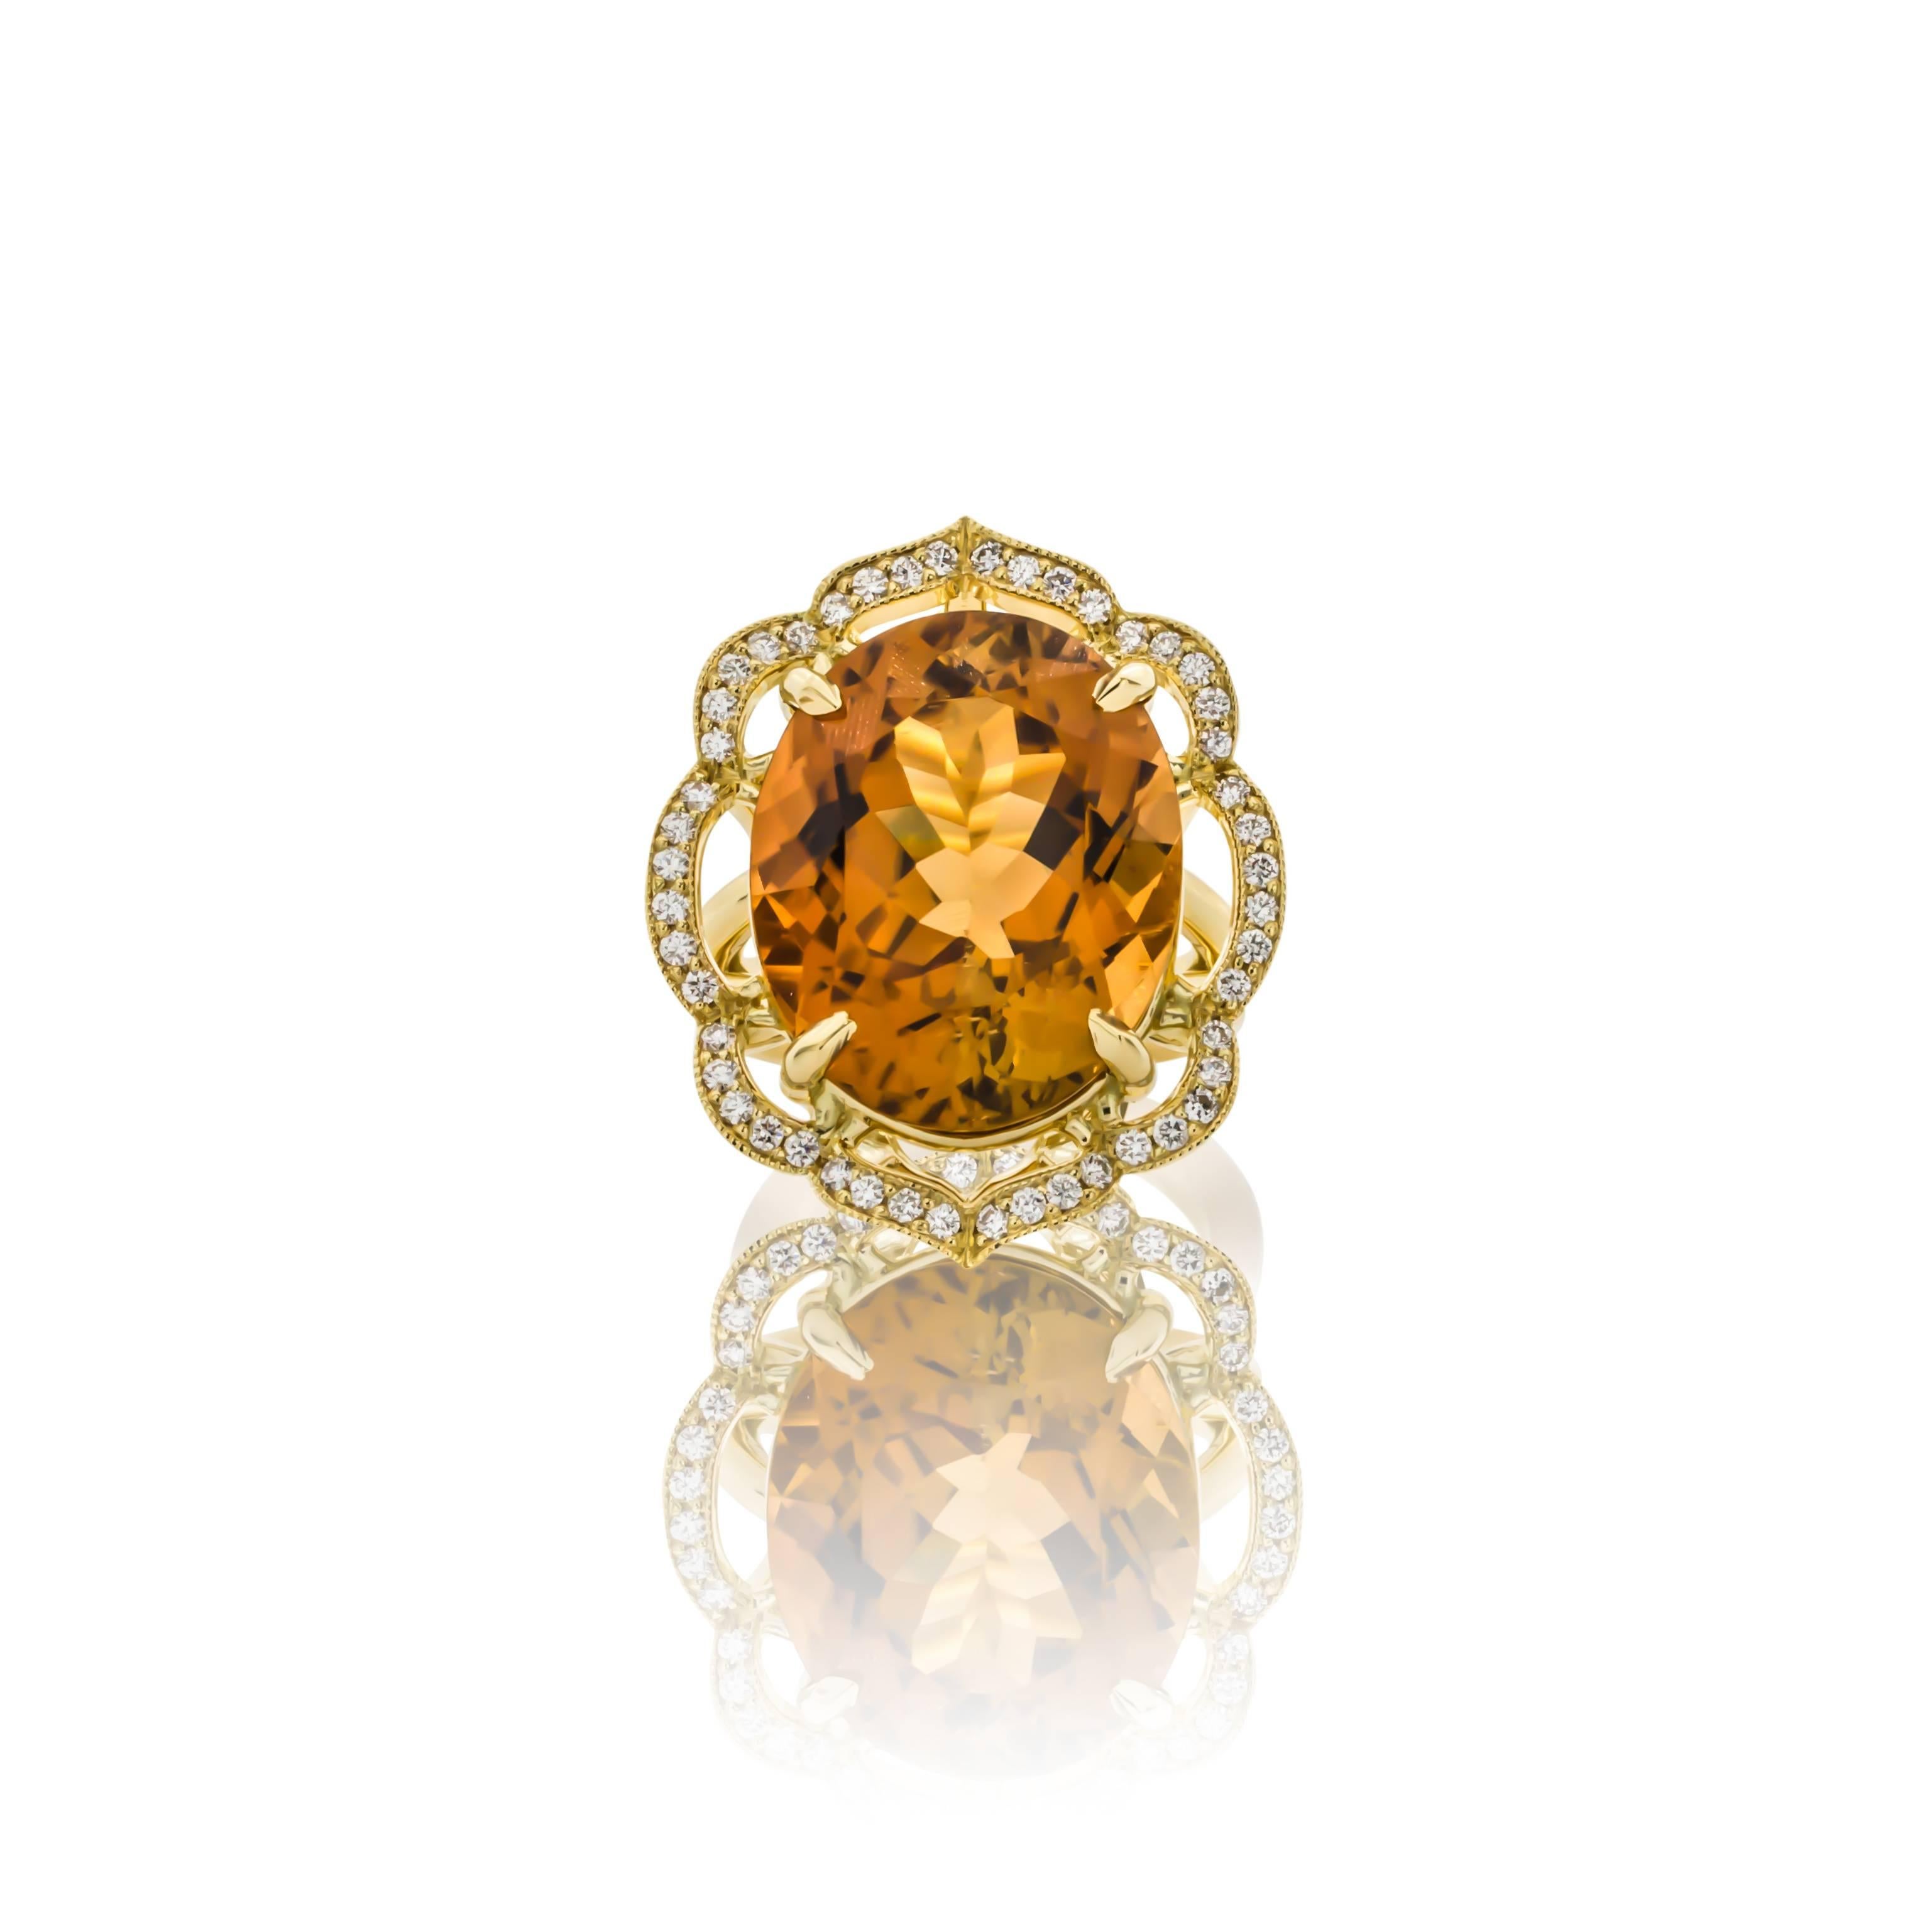 Brand New: One of a kind 18K yellow gold orange tourmaline & diamond ring.  Prong set with one oval orange tourmaline weighing 23.27 carats of fine color and clarity, surrounded by a scalloped design accented with forty-eight round brilliant cut